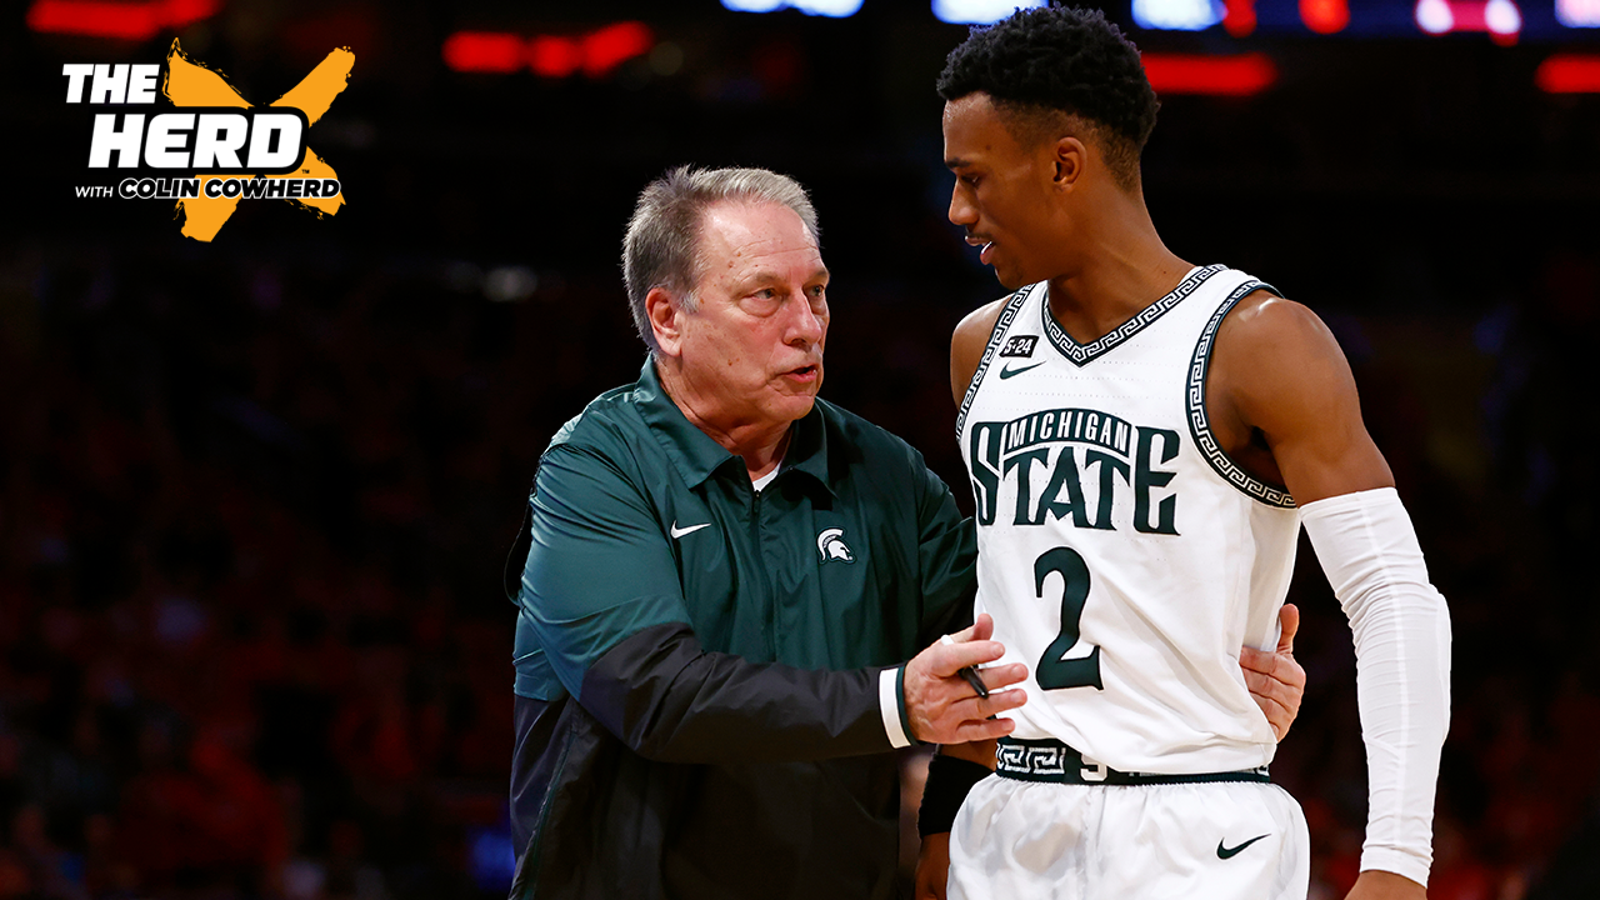 Tom Izzo on the impacts of analytics and the transfer portal on college athletics